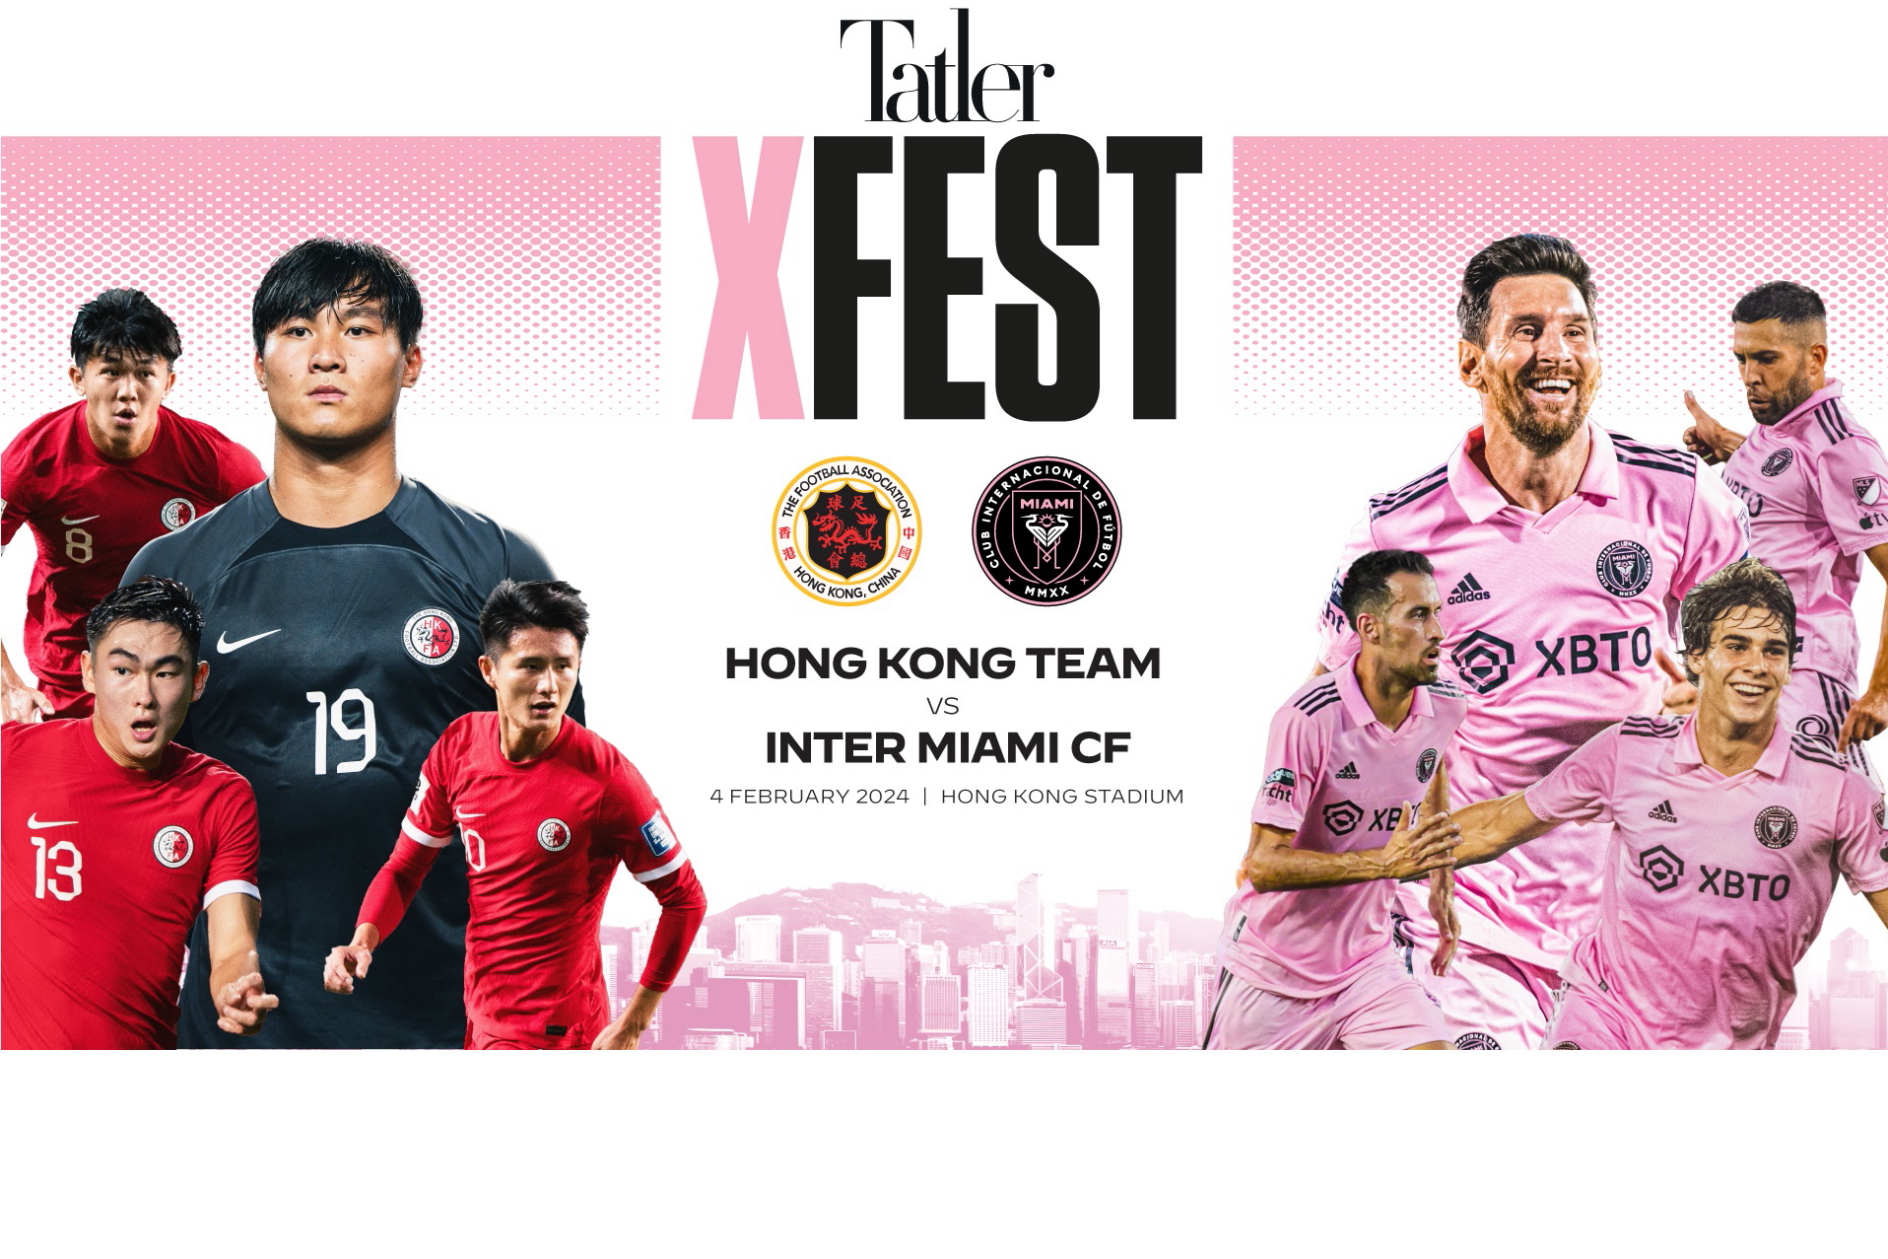 Inter Miami CF will play in an exhibition match in Hong Kong on 4 February 2024. Click to enlarge.